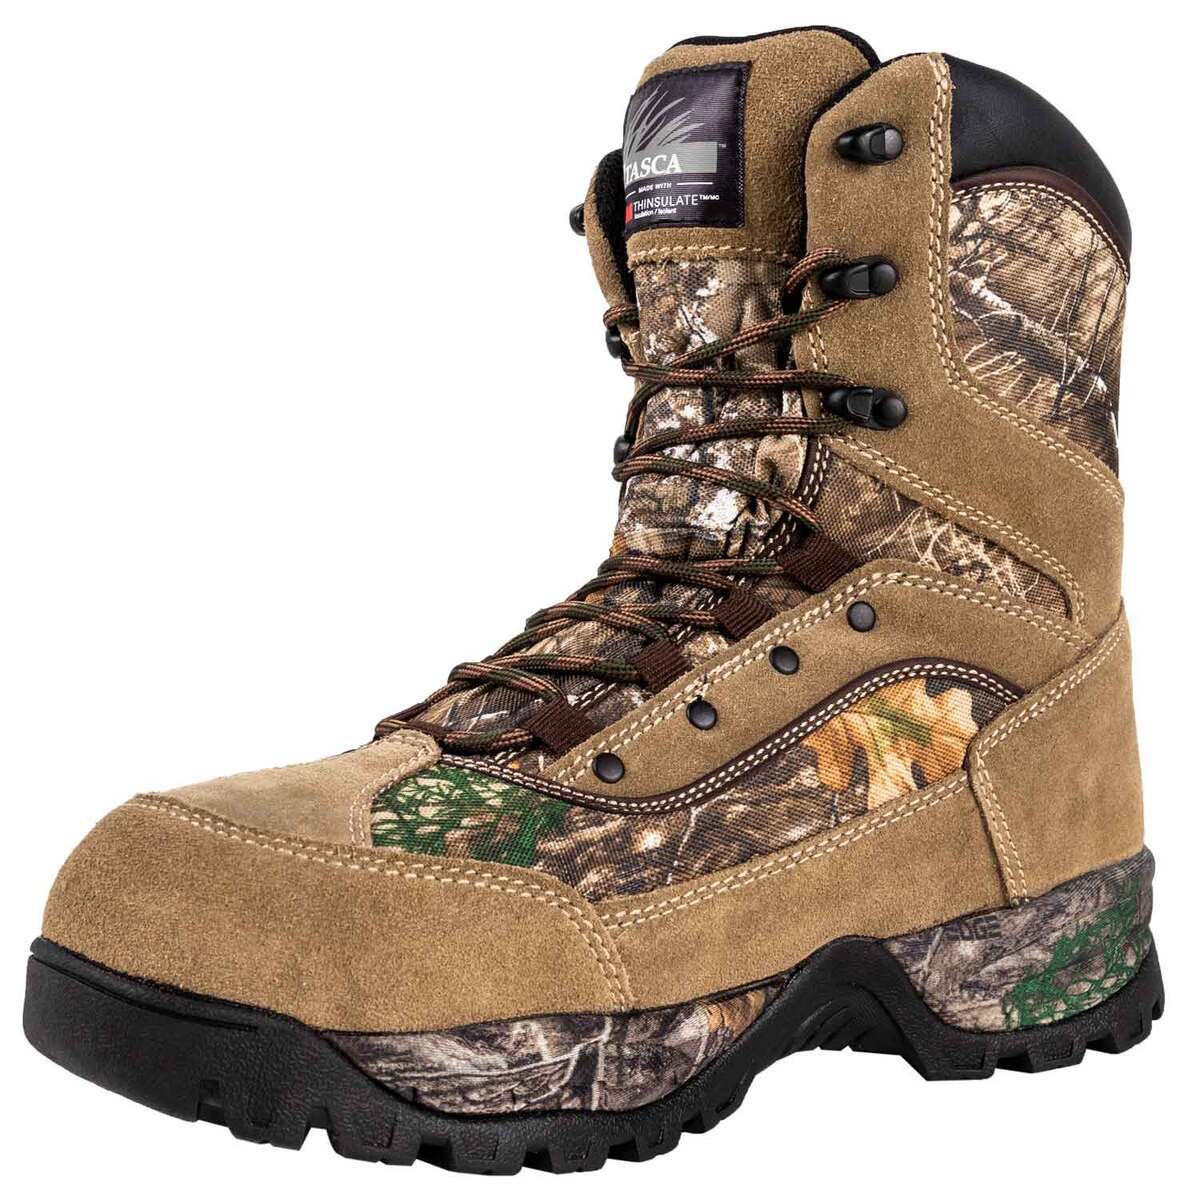 Itasca Men's Realtree Edge Grove Insulated Waterproof Hunting Boots ...